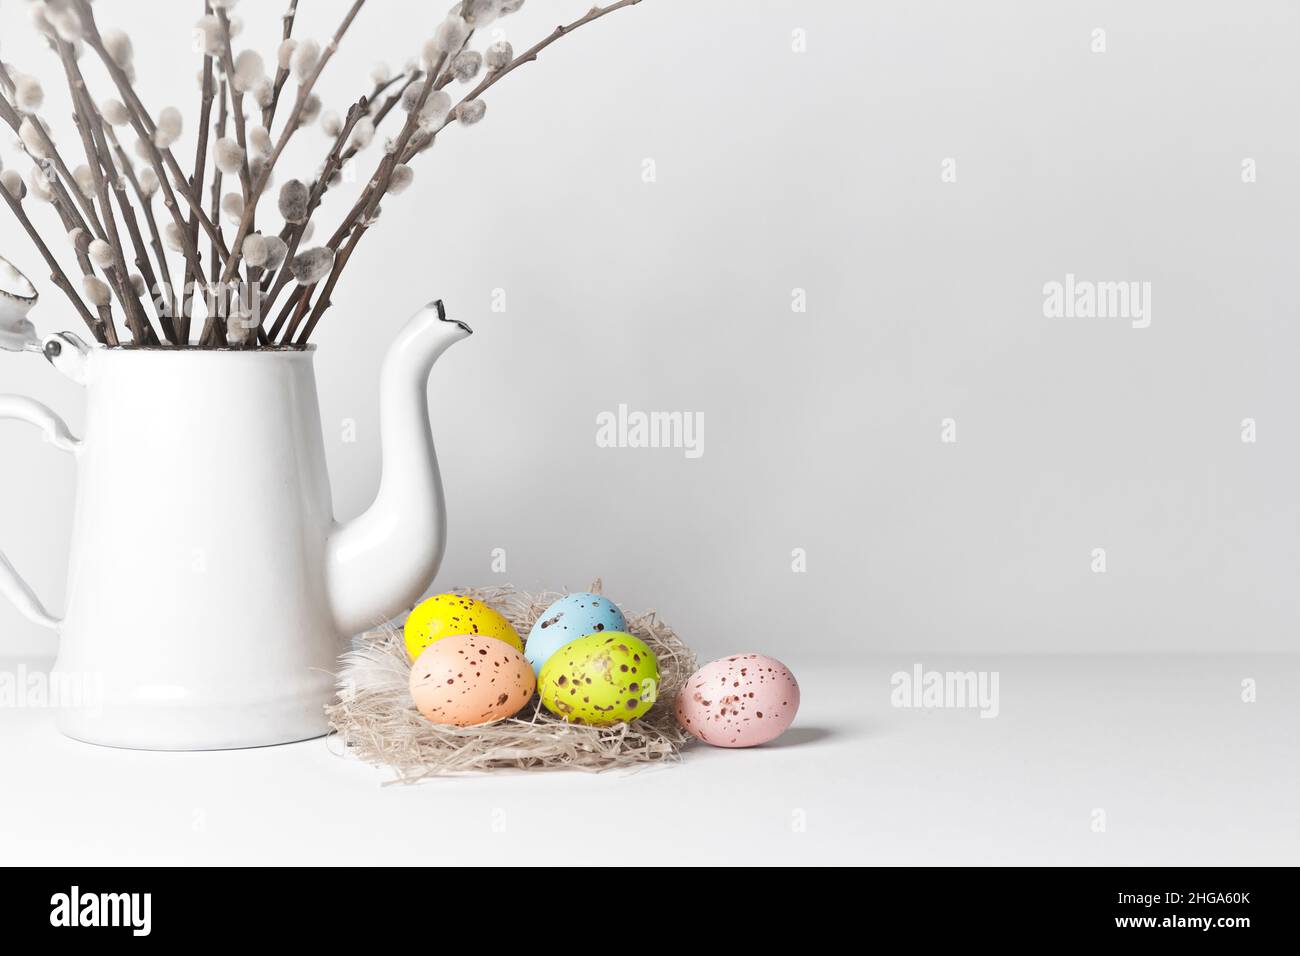 Easter eggs in soft colors on a nest with pussy willow twigs in a jug, white background, copy space for Happy Easter text. Stock Photo